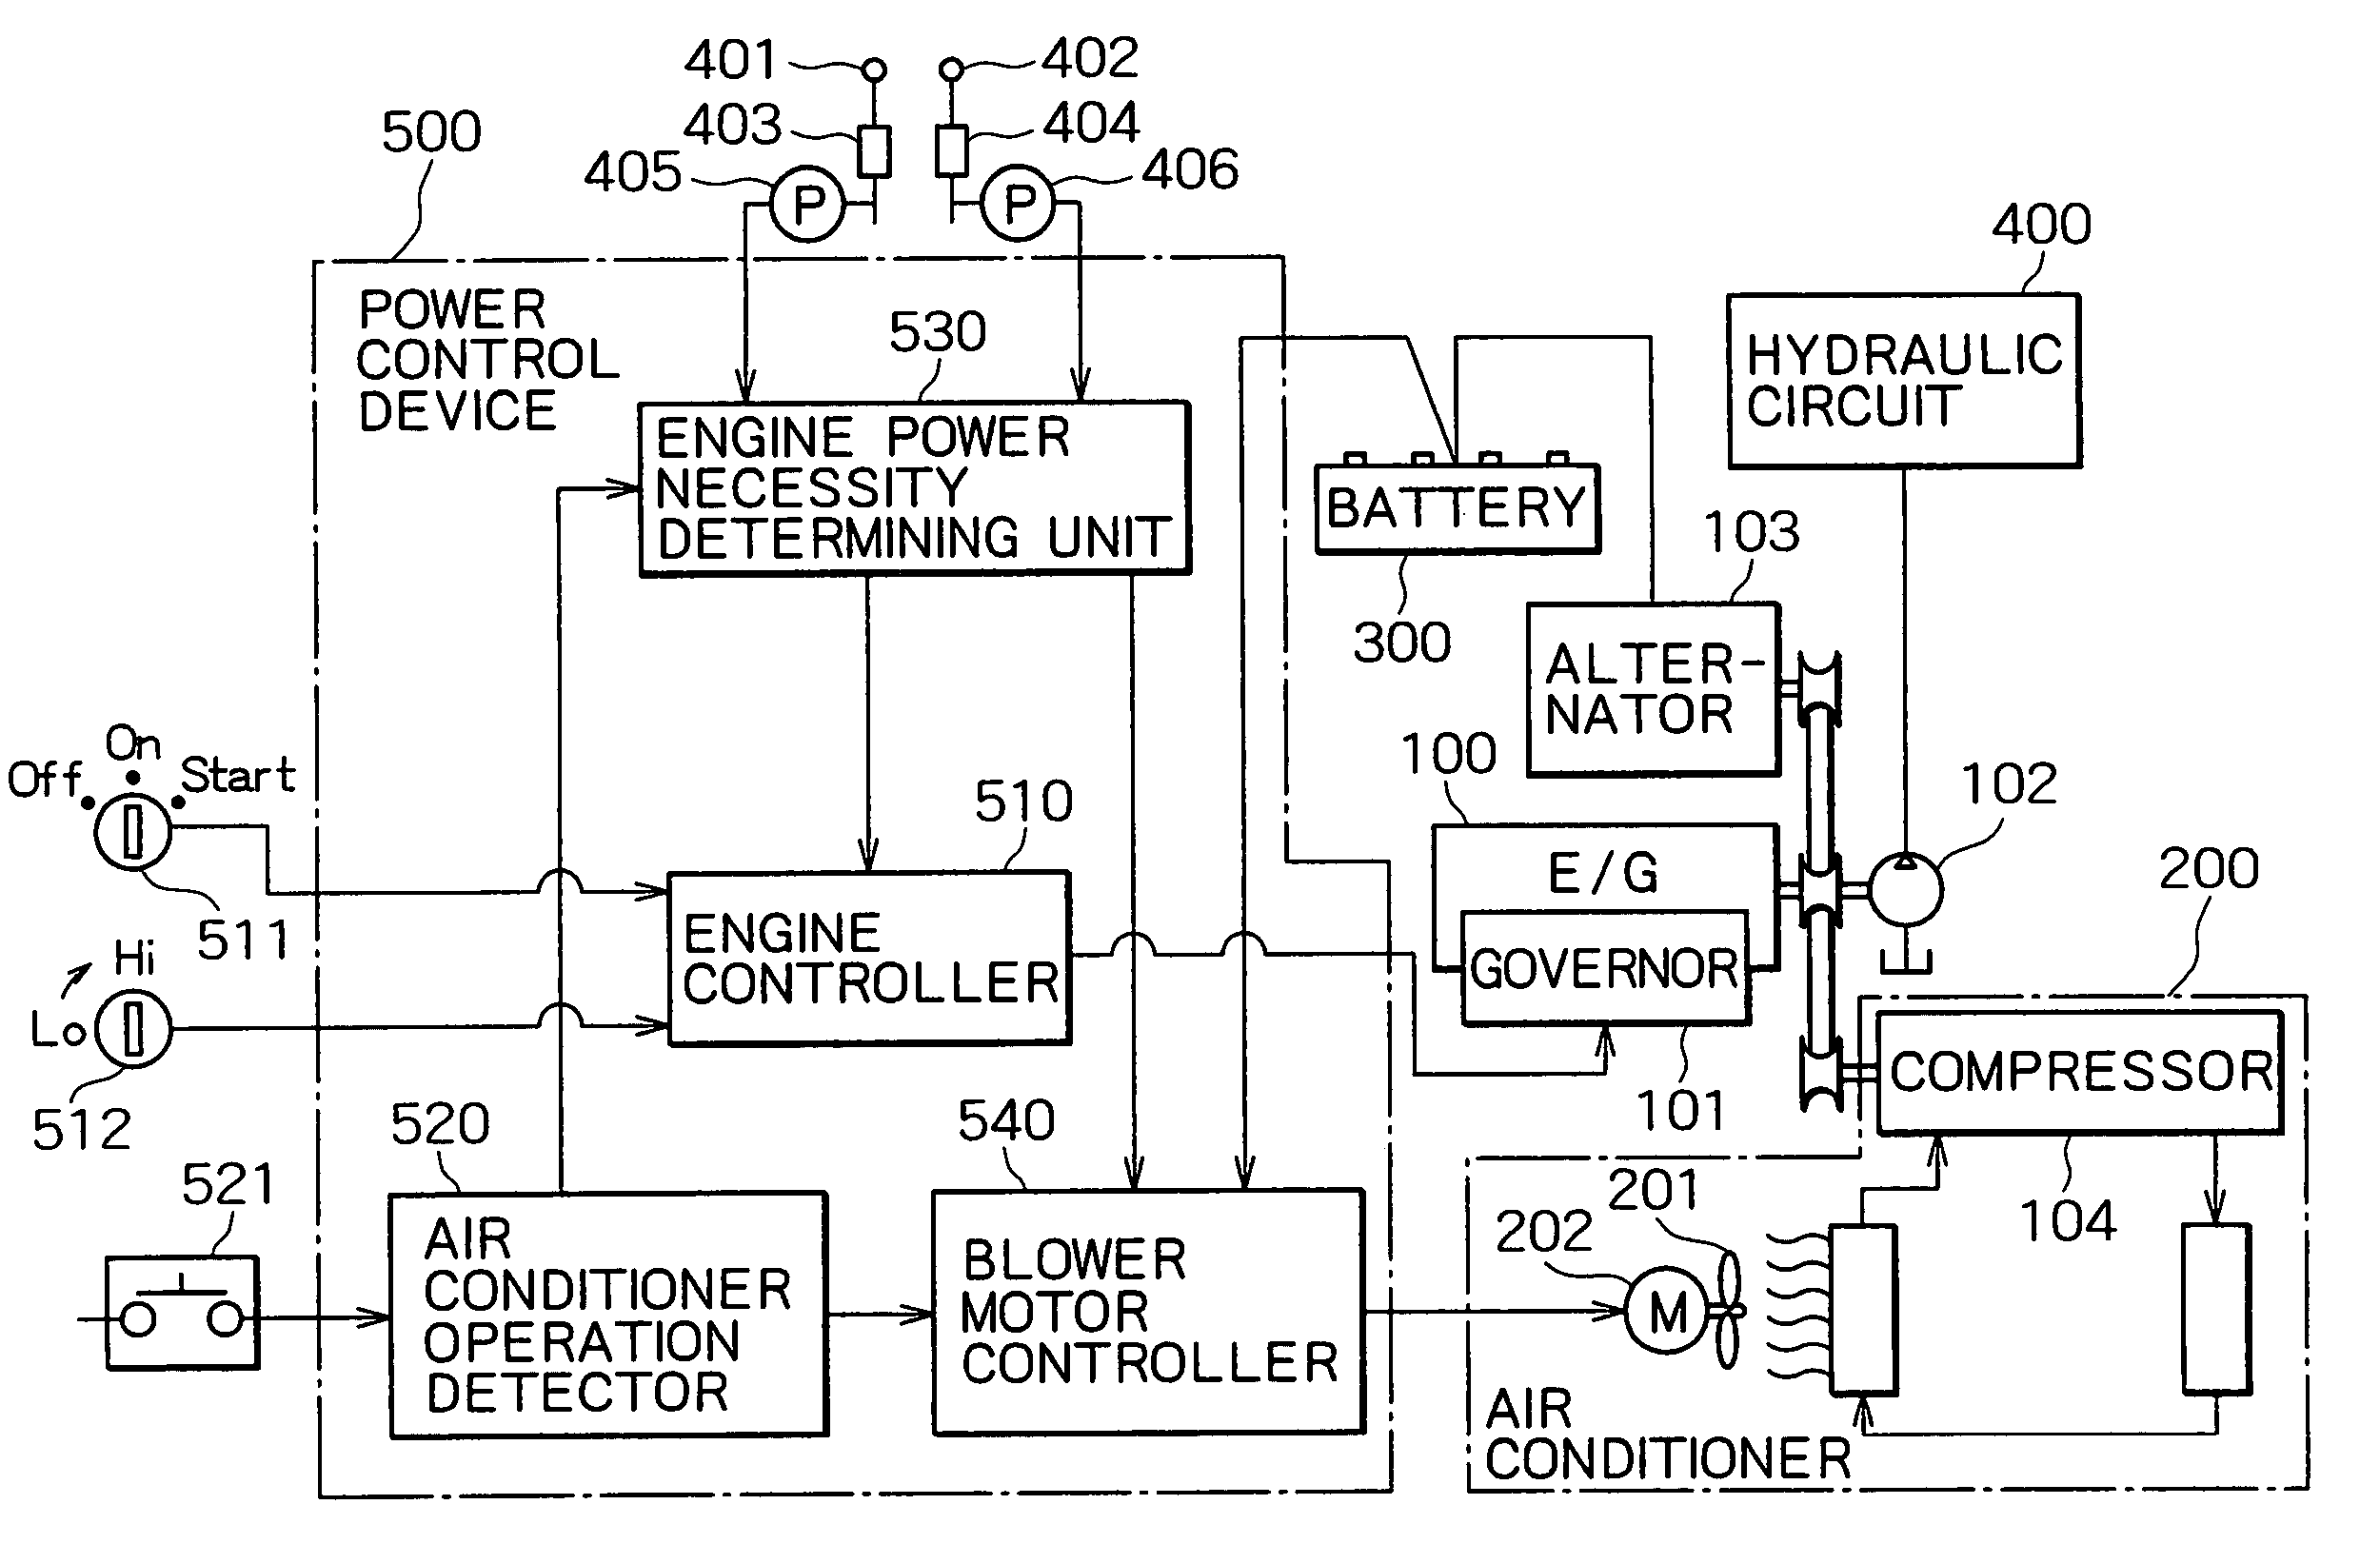 Power control device for construction machine